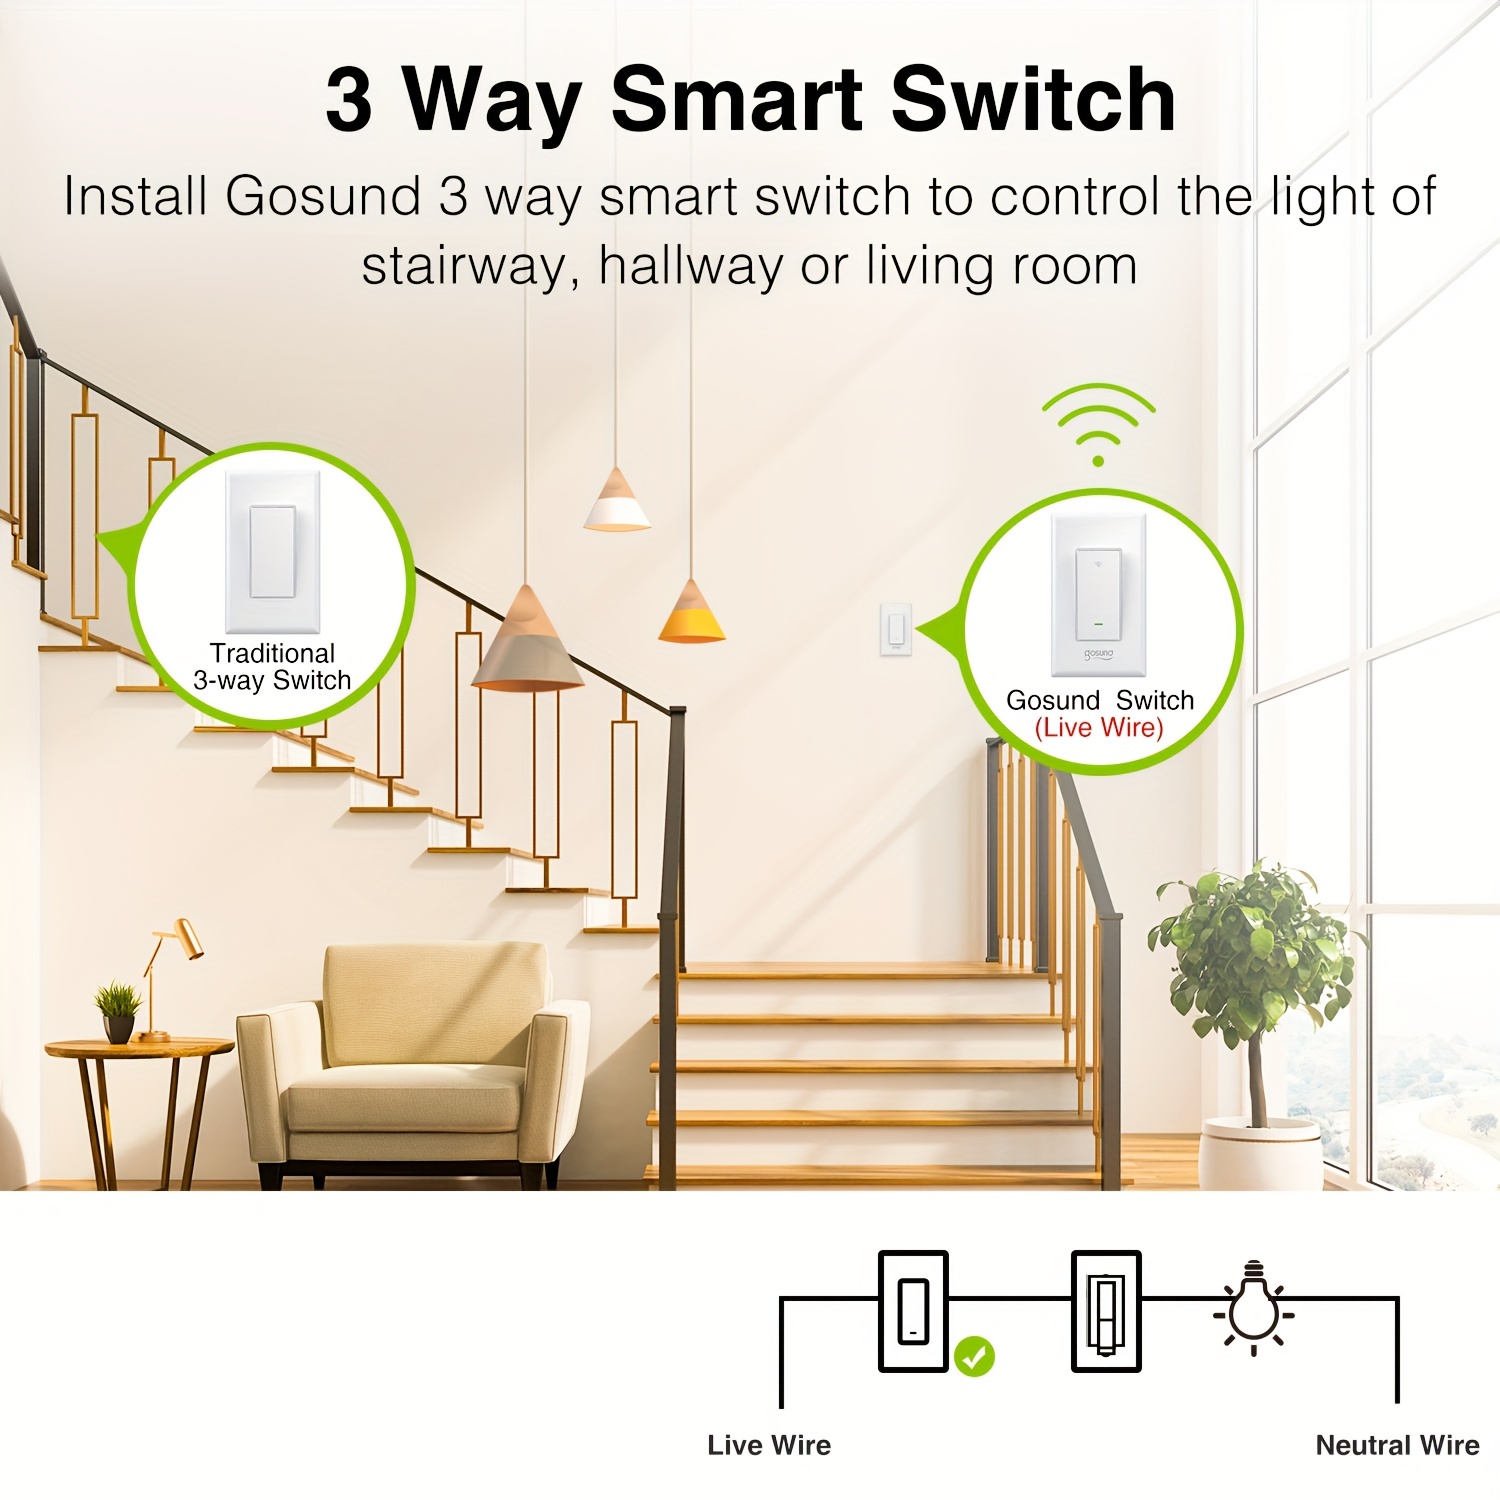 GHome Smart Mini Smart Plug, WiFi Plug Outlet Timer Smart Socket Works with Alexa and Google Home, App Control, No Hub Required, ETL FCC Listed, 2.4Gh